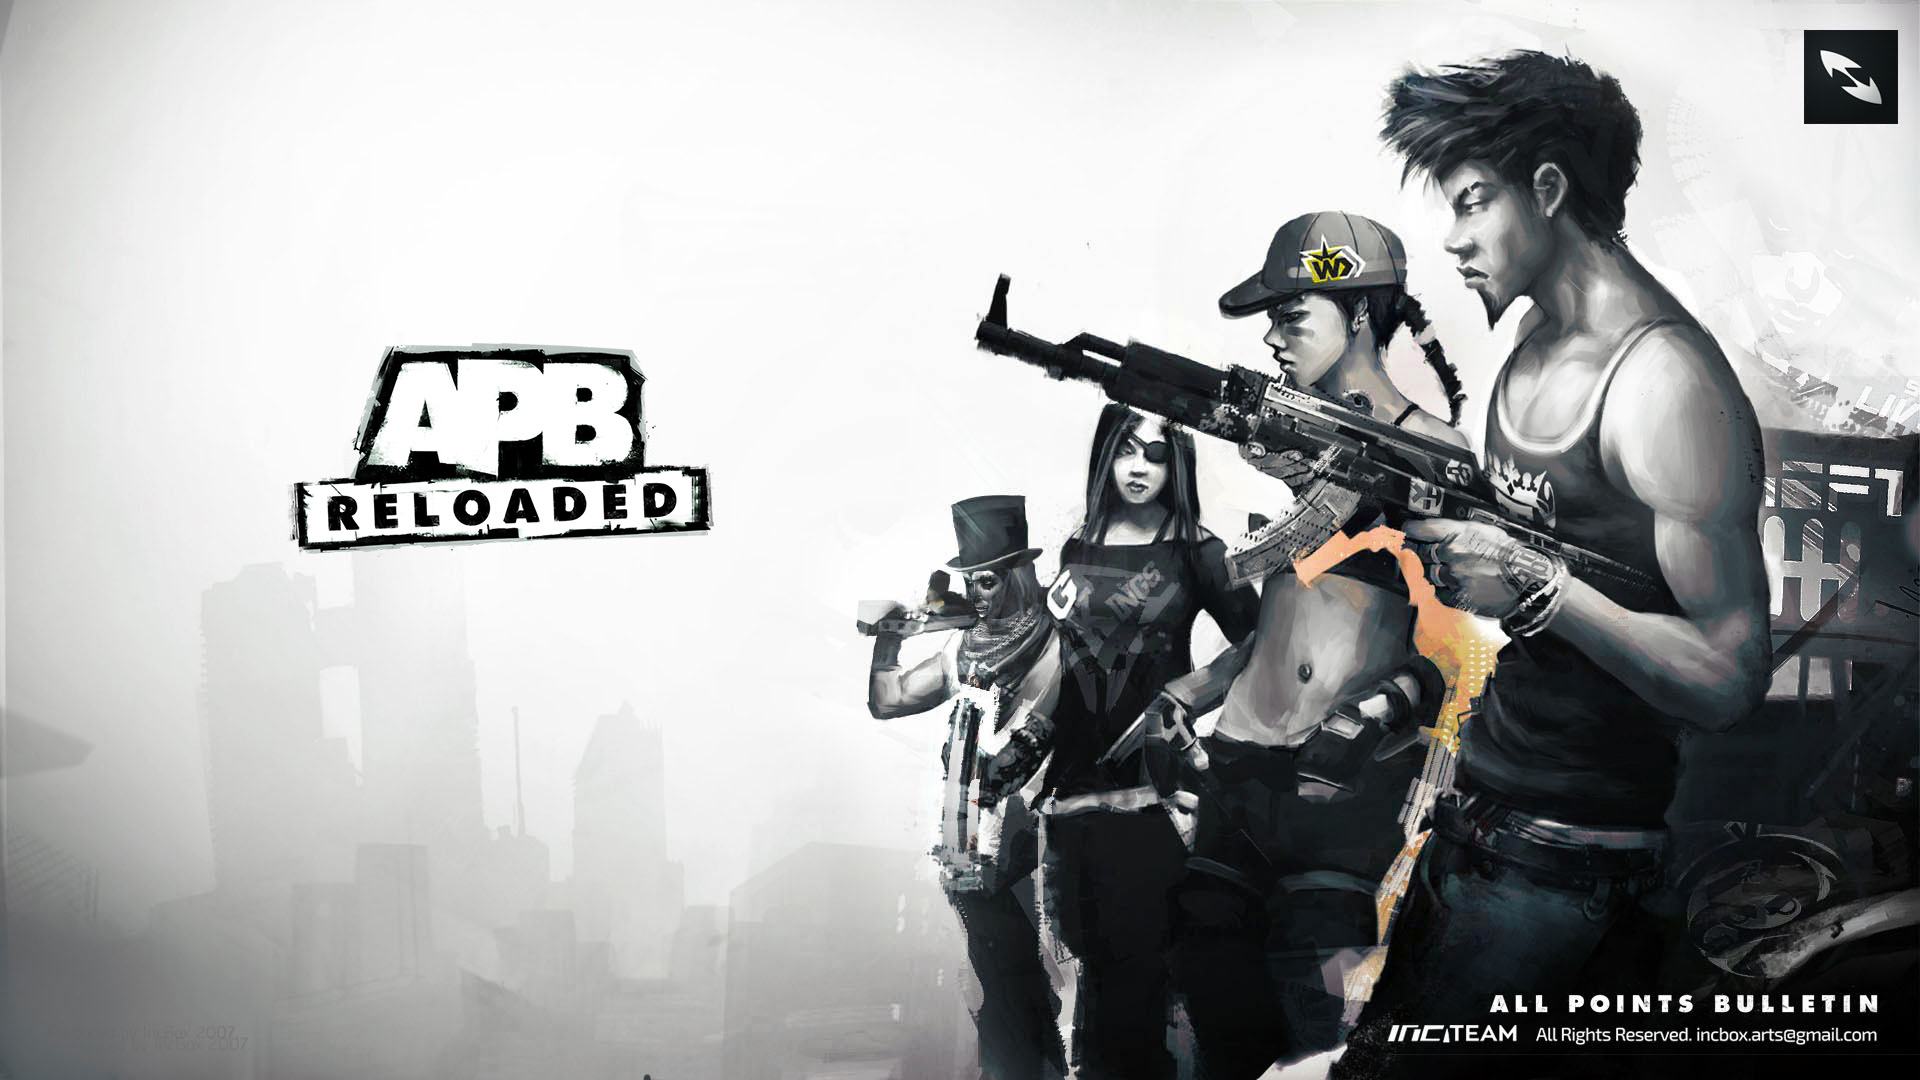 Apb Reloaded Wallpaper Concept Art By Incbox